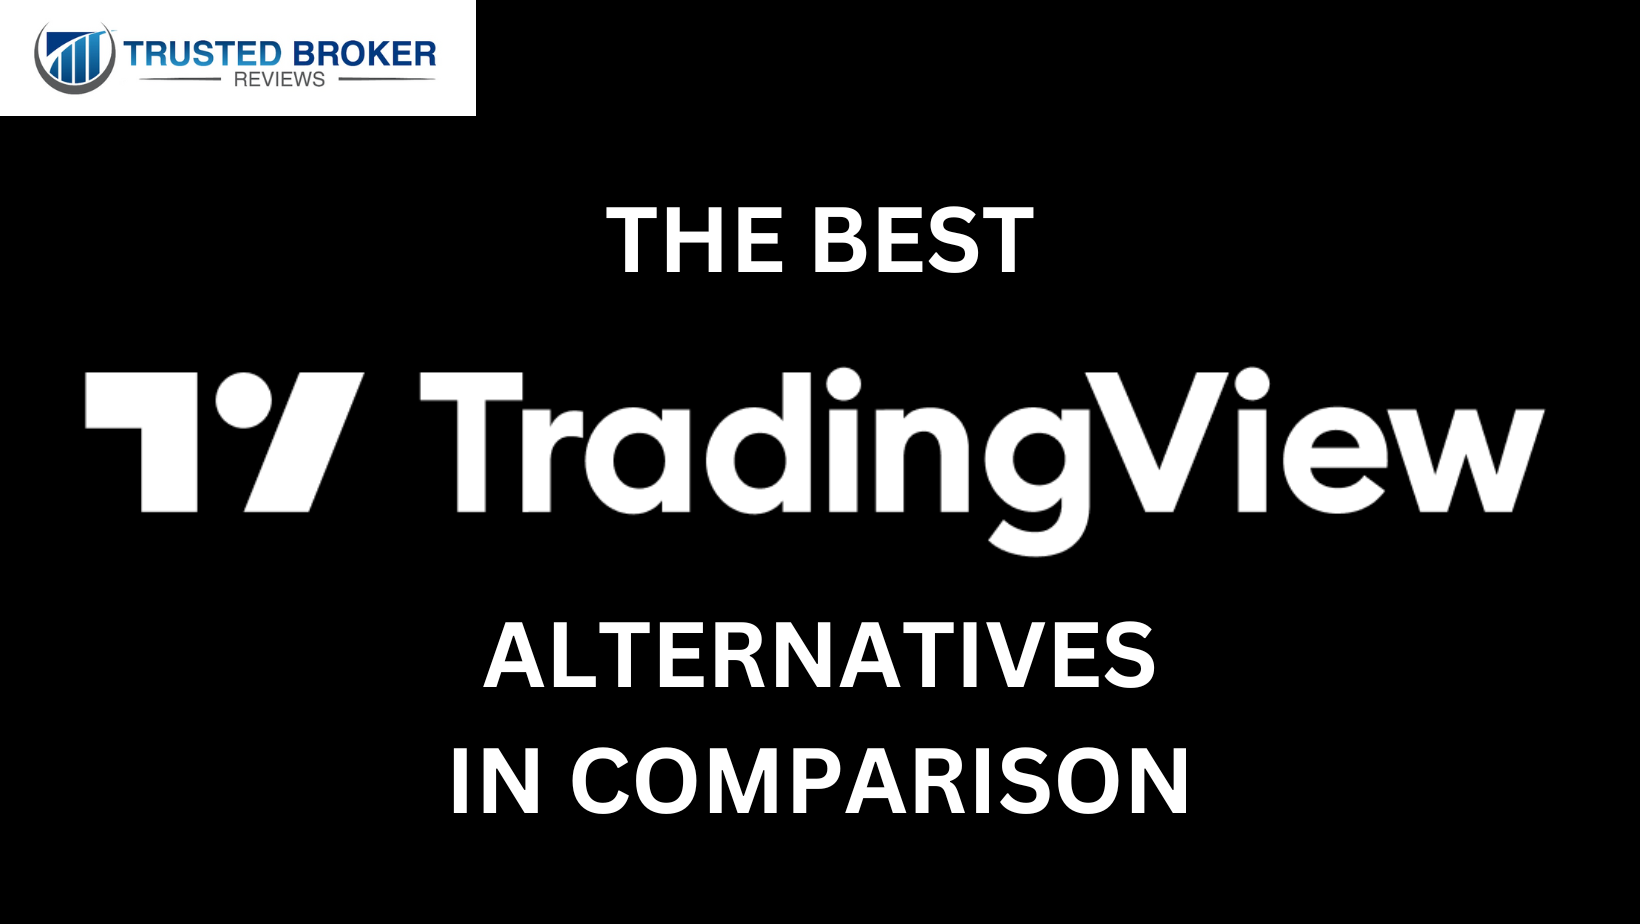 The best tradingview alternatives in comparison